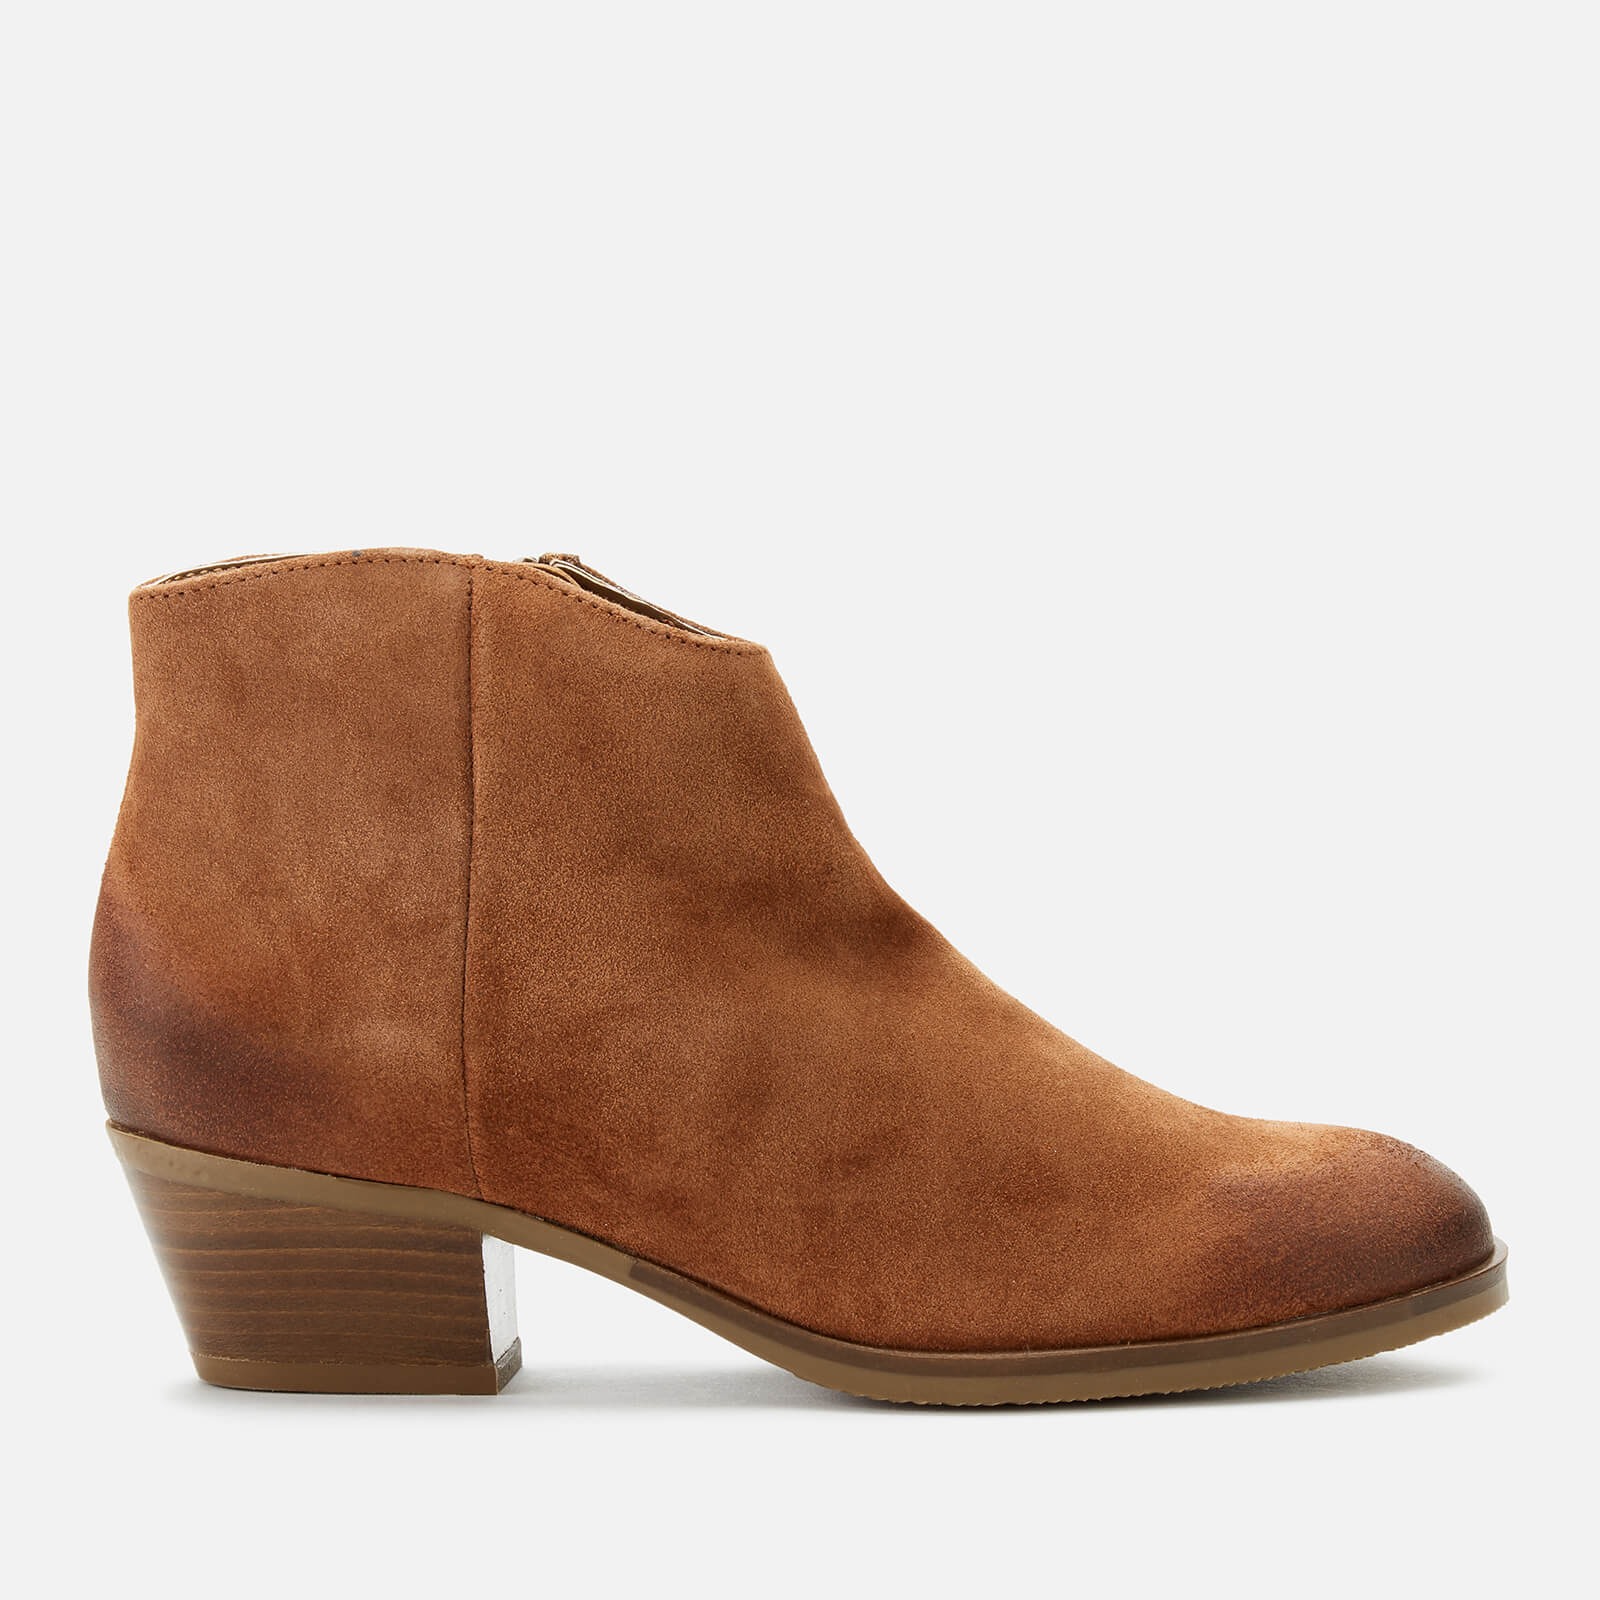 clarks ankle boots uk shopping a53a9 743b5